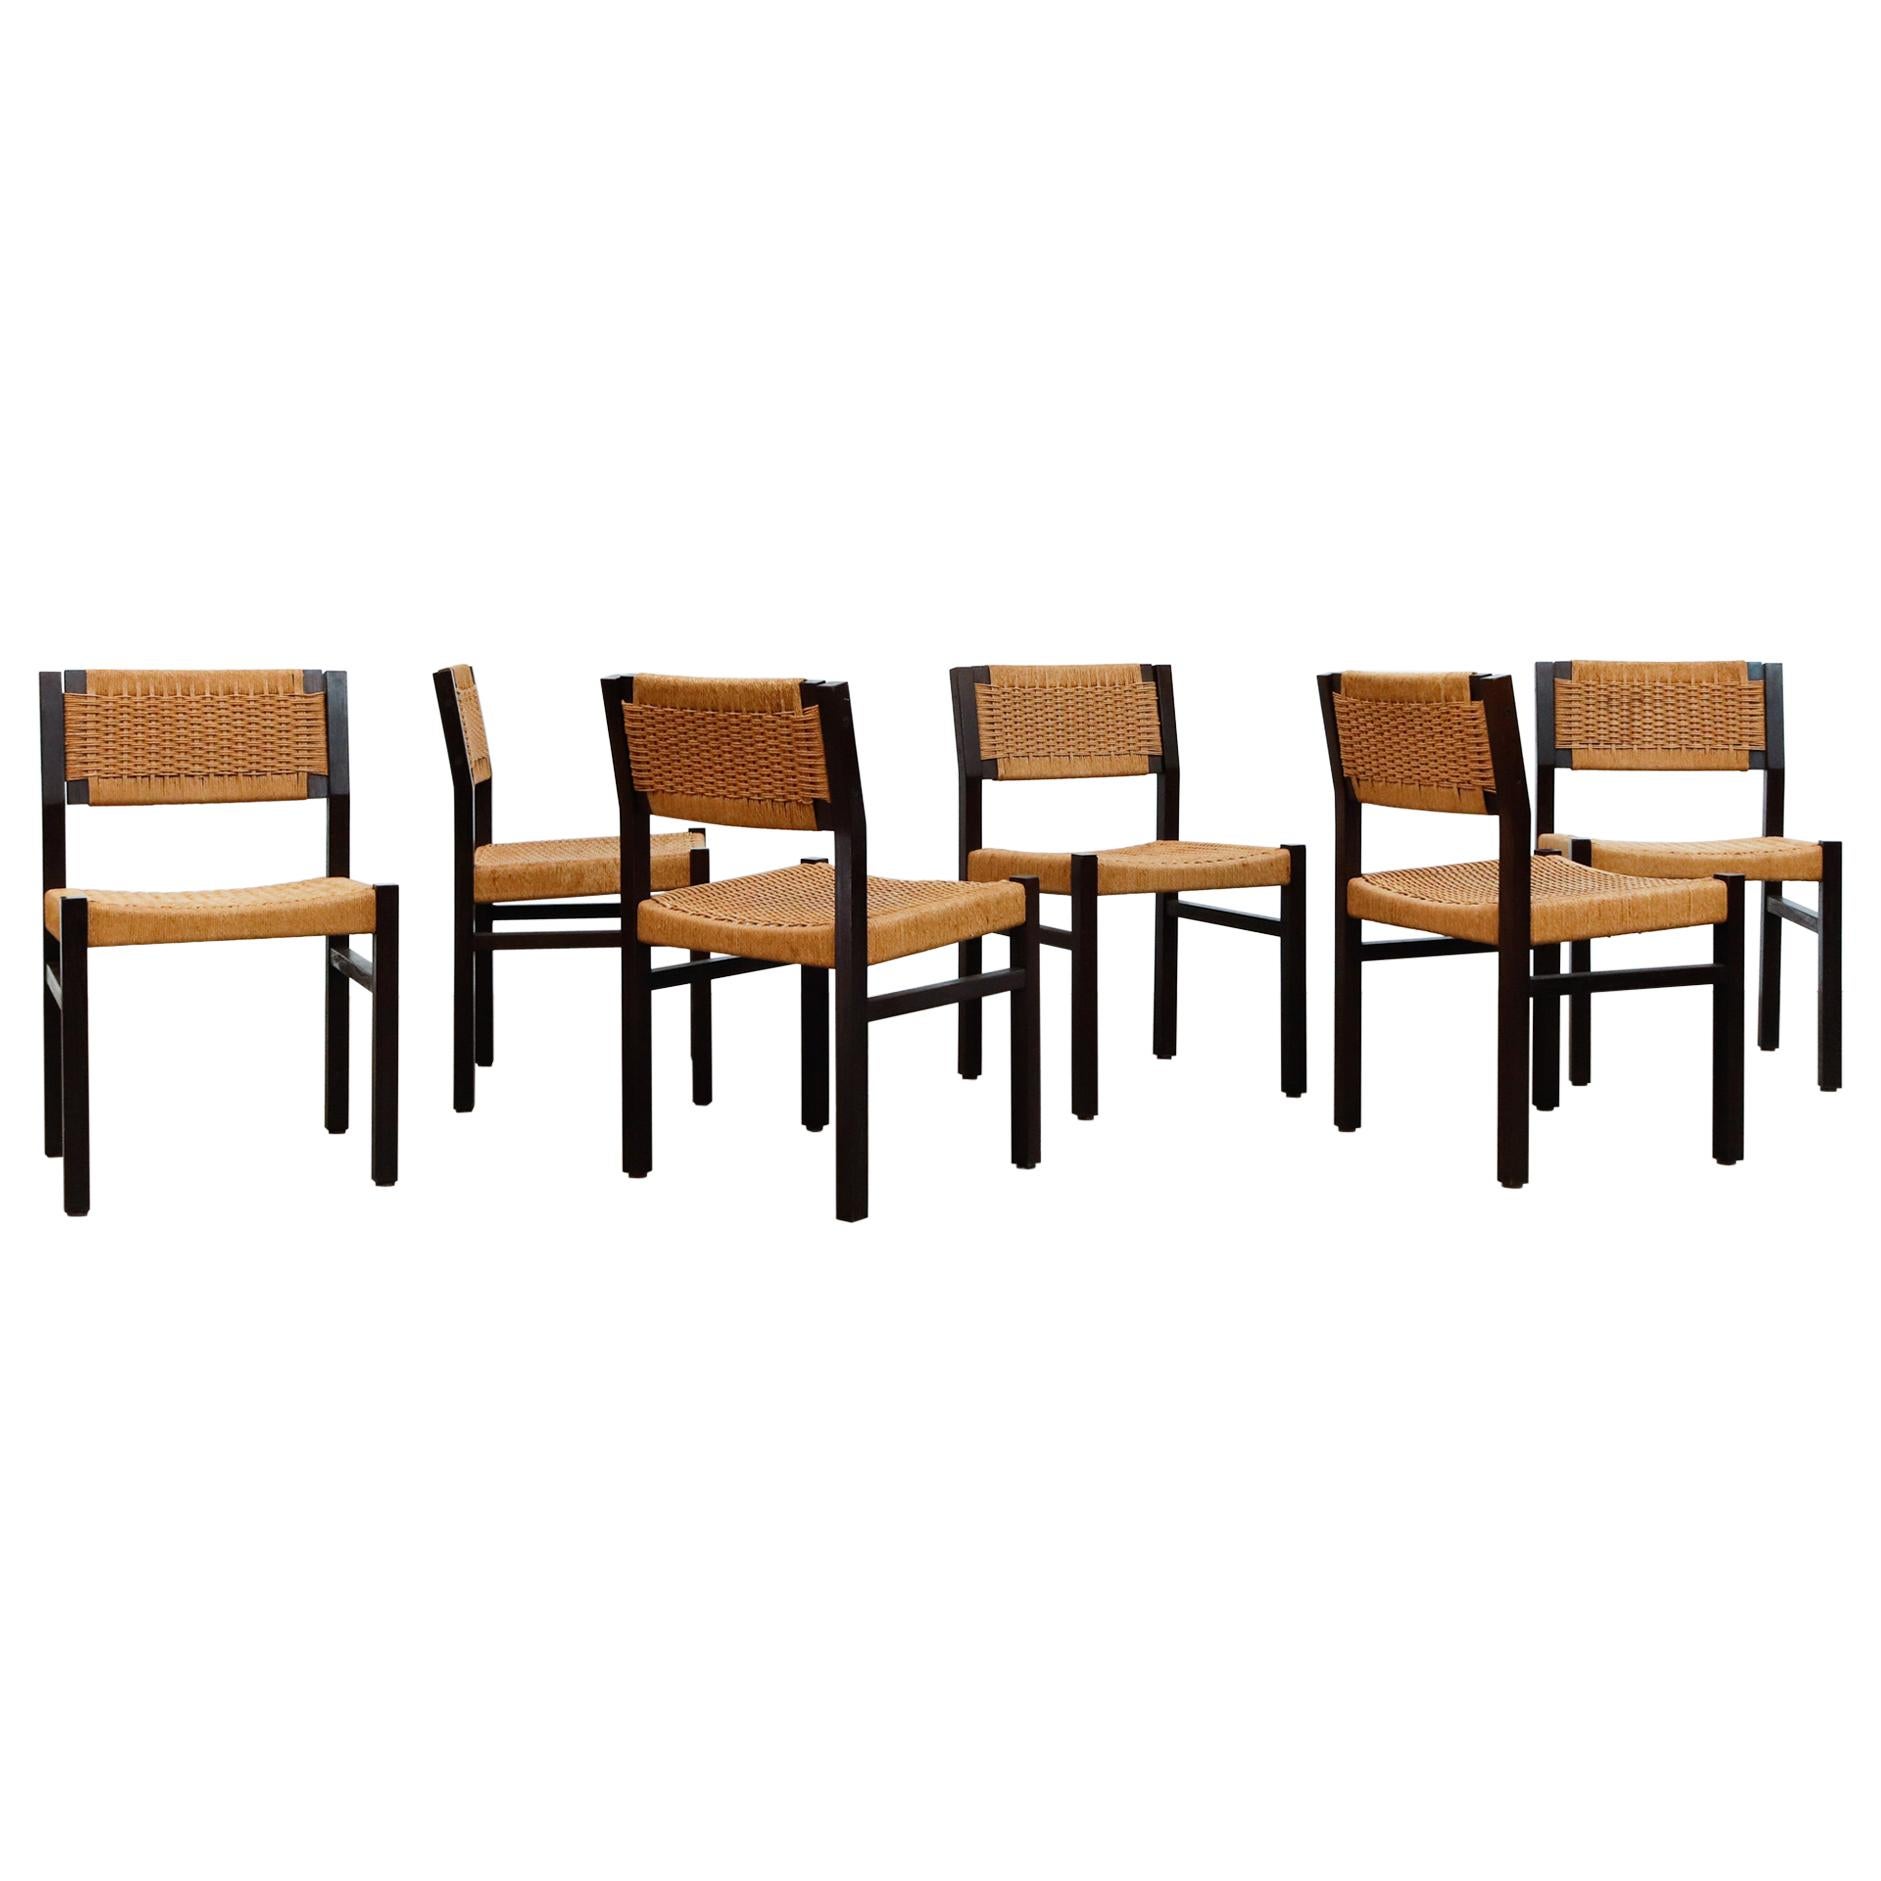 Set of 6 Wenge & Papercord Dining Chairs by Arnold Merckx for Fristho, 1973